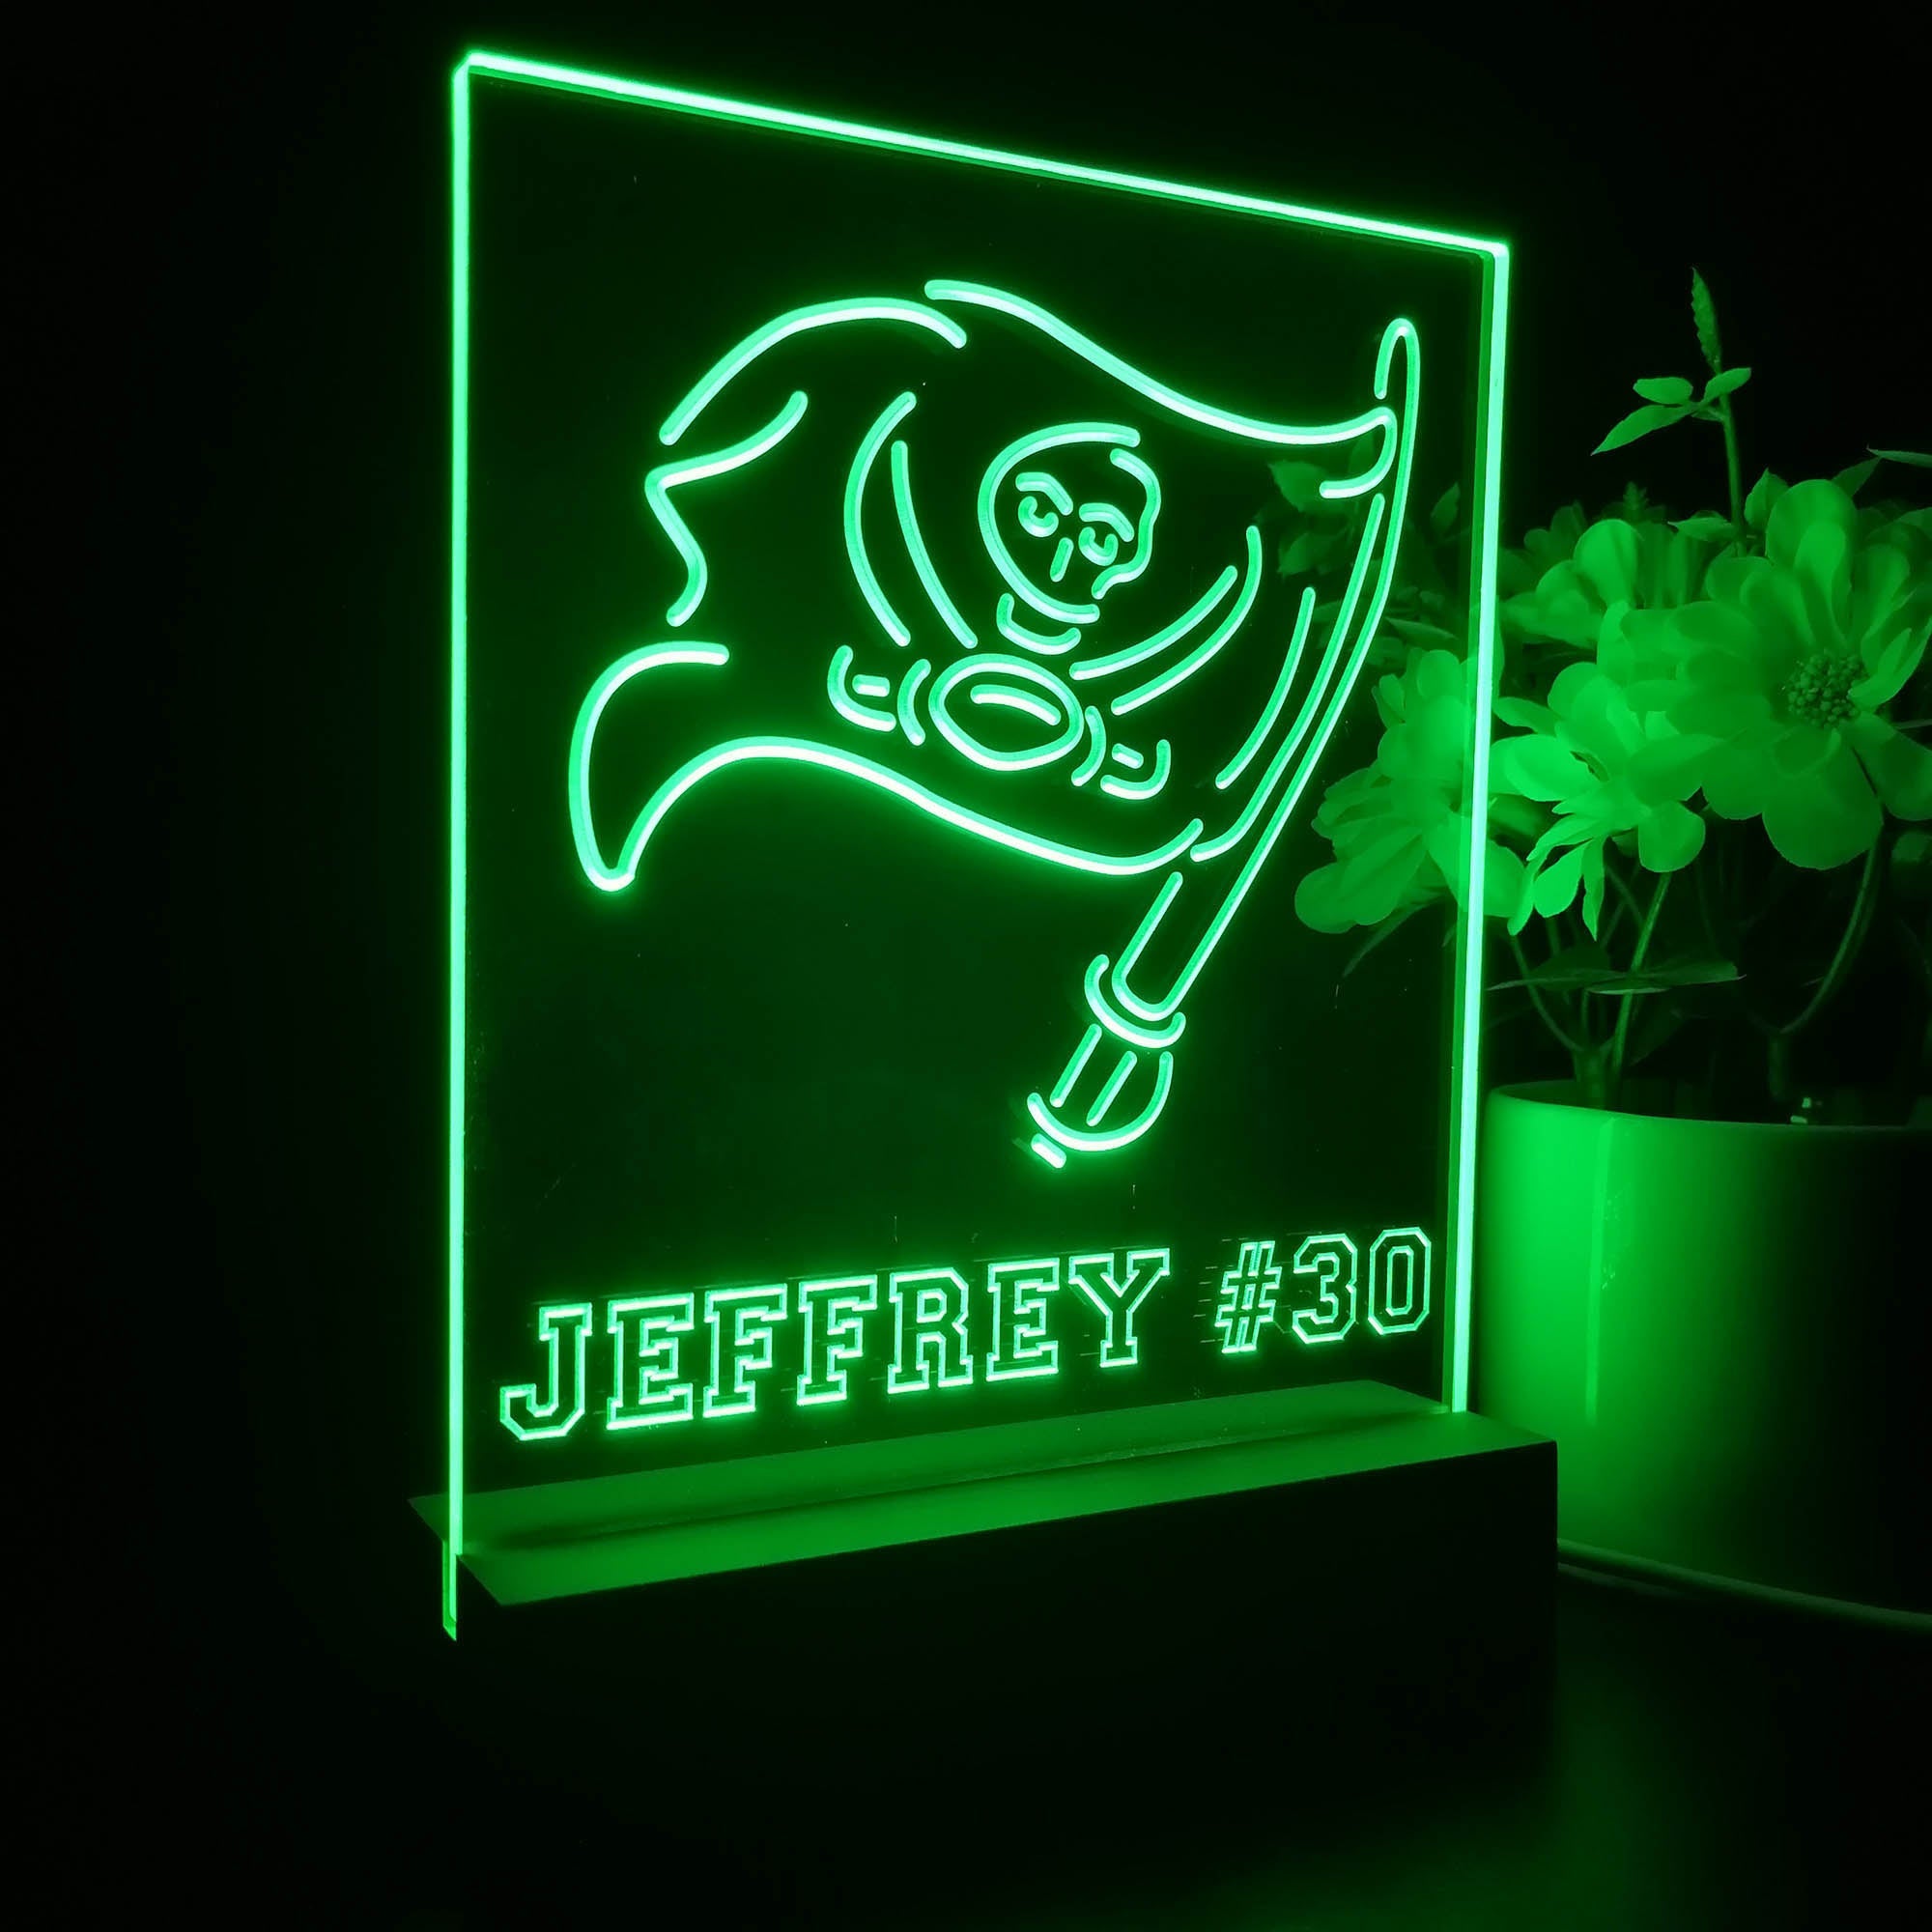 Personalized Tampa Bay Buccaneers Souvenir Neon LED Night Light Sign